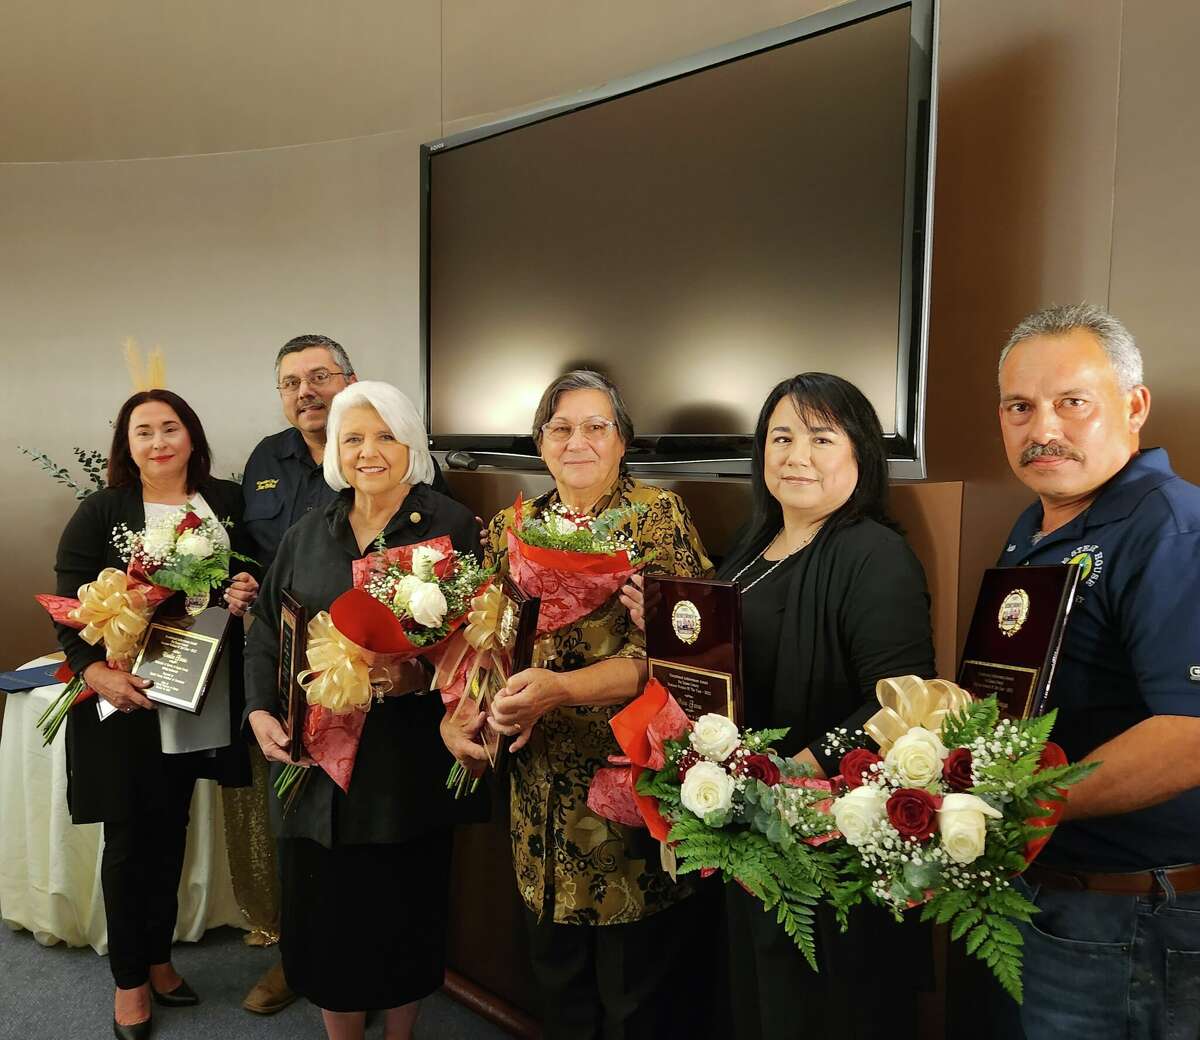 The Zapata County Chamber of Commerce’s Successful Businesswomen Awards event was held on Tues day as part of their "Recognizing Zapata Past and Present Business Women" Event Gala. The women honored at the event include present nominees Sara Garza and Claudia Garcia and past nominee honorees Hortencia Medina Barragan and Janet Villarreal. 